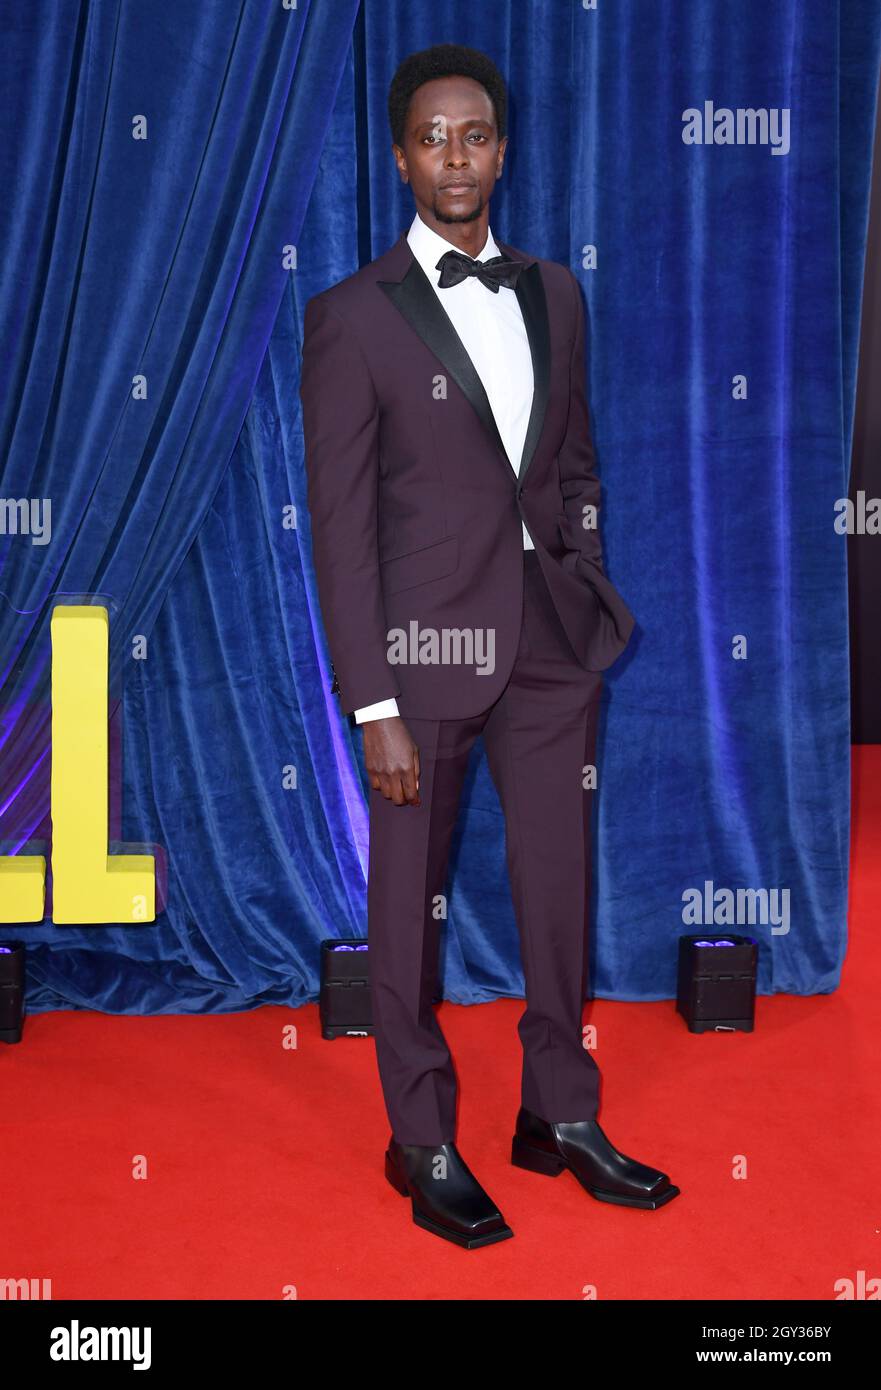 London, UK. October 6th, 2021, London, UK Edi Gathegi arriving at The Harder They Fall World Premiere, the opening night film of the BFI London Film Festival, held at The Royal Festival Hall. Credit: Doug Peters/EMPICS/Alamy Live News Stock Photo